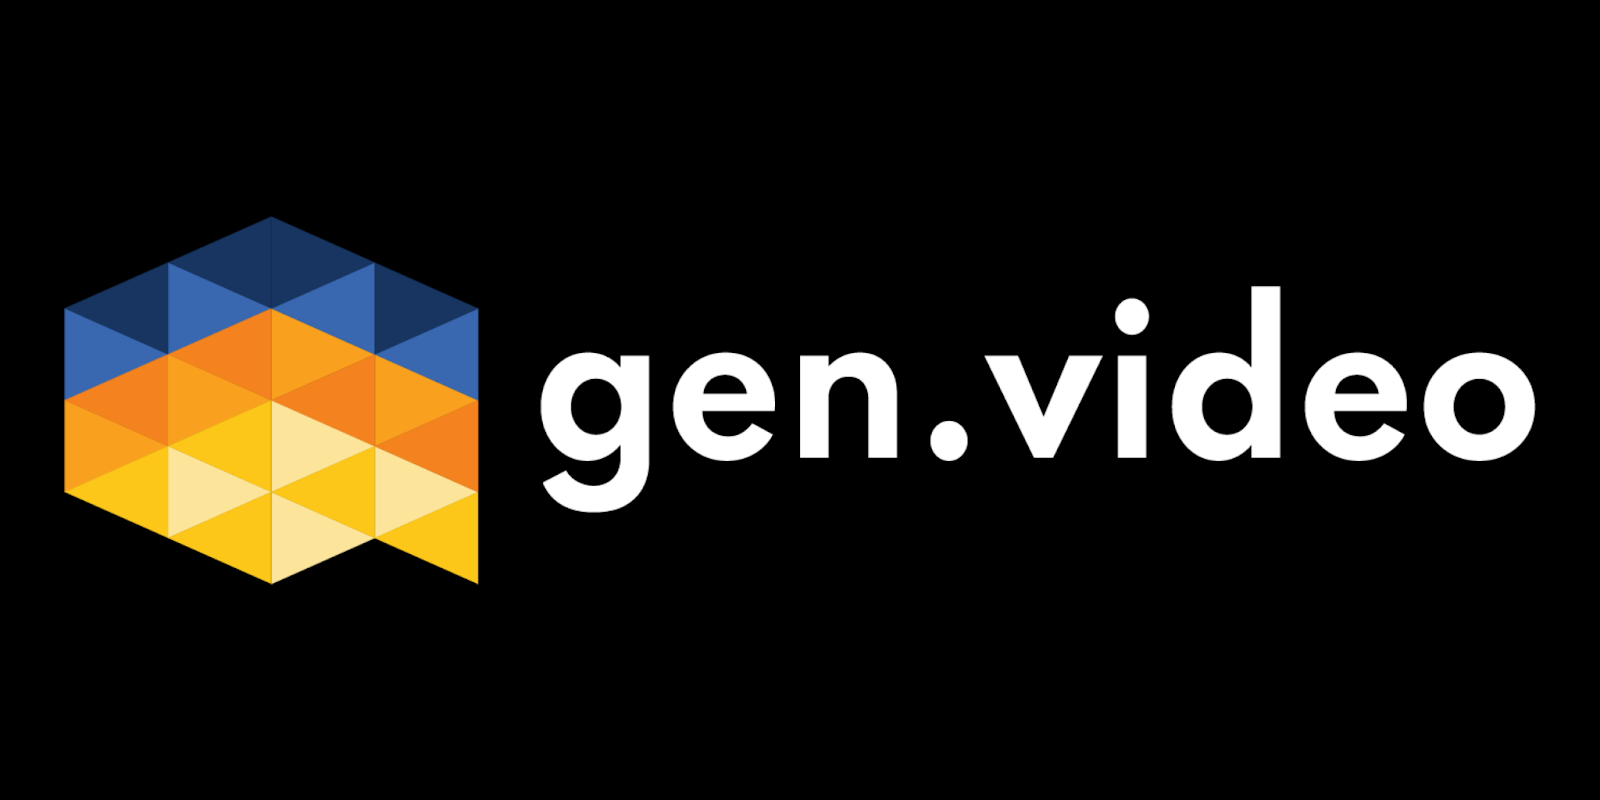 gen.video CEO Jessica Thorpe on Innovating in the Creator Economy